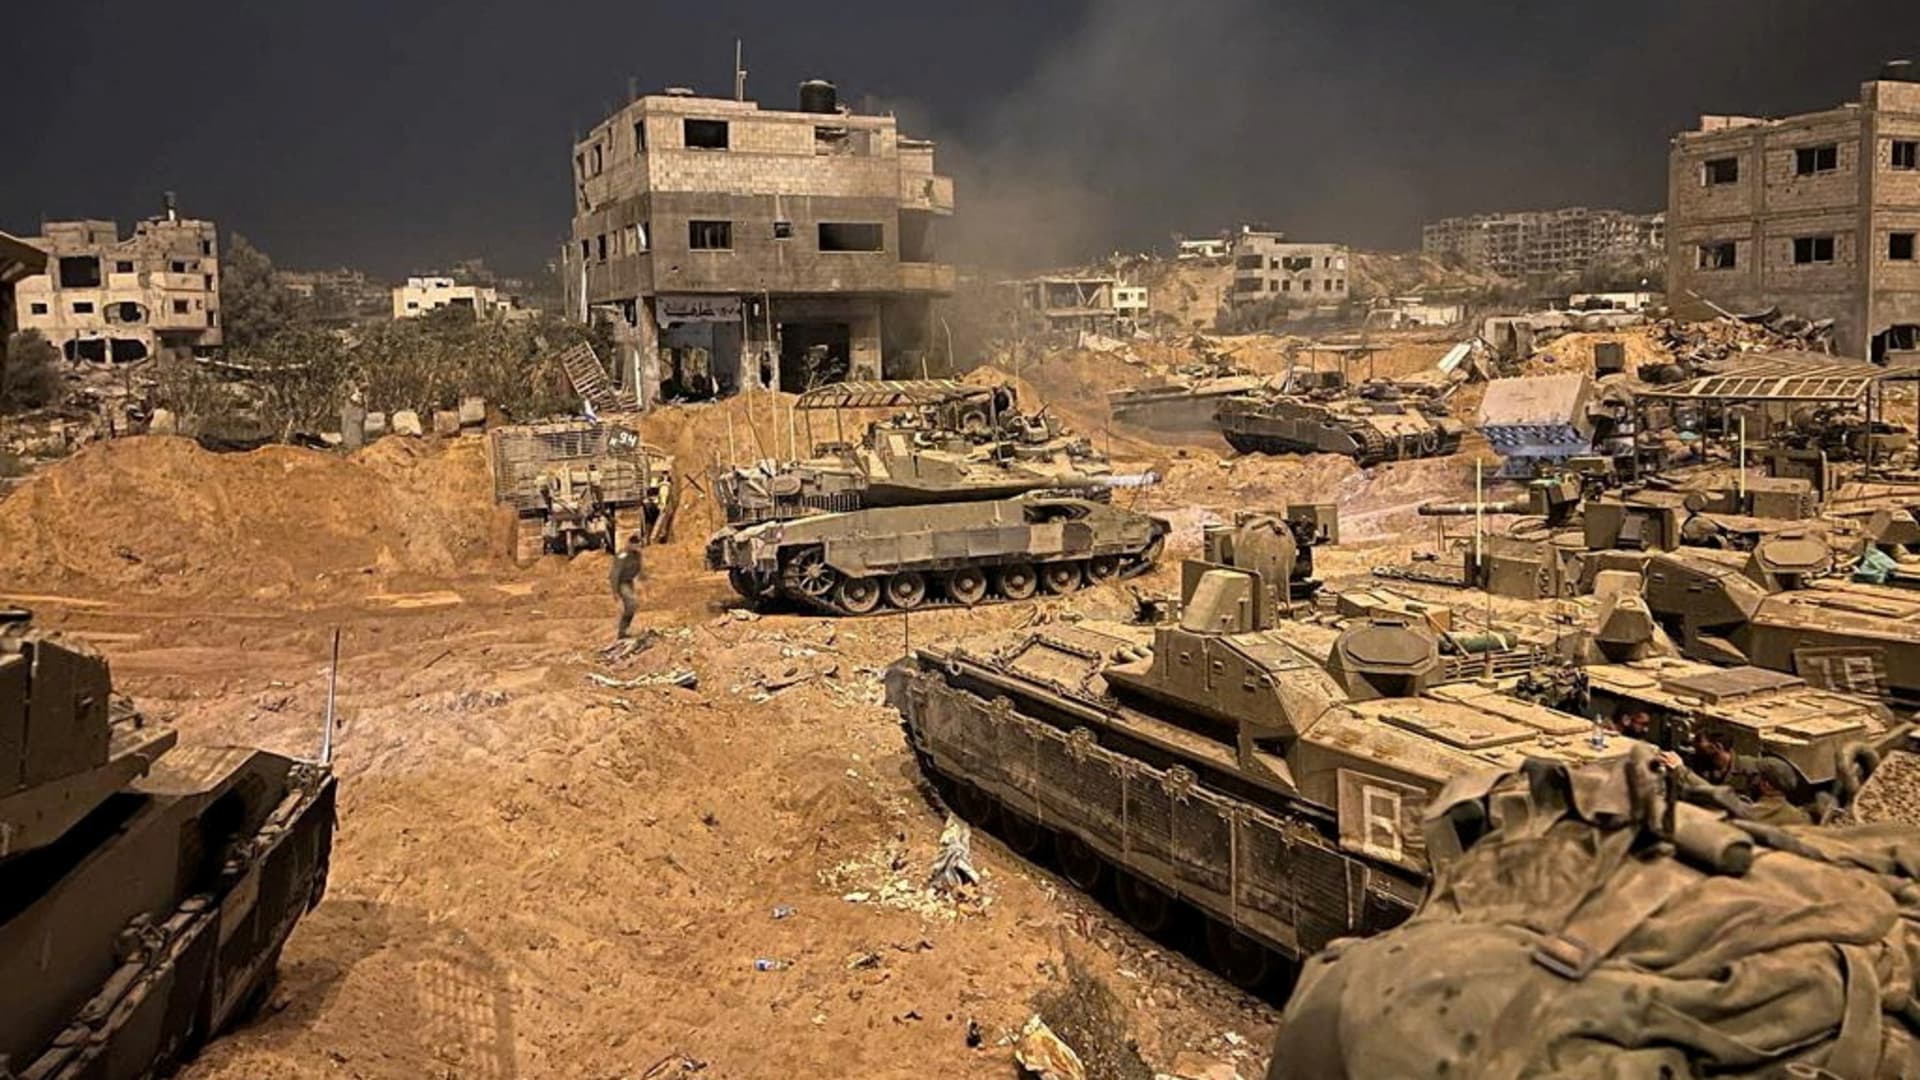 Armoured vehicles of the Israel Defense Forces (IDF) are seen during their ground operations at a location given as Gaza, as the conflict between Israel and the Palestinian Islamist group Hamas continues, in this handout image released on November 1, 2023. 